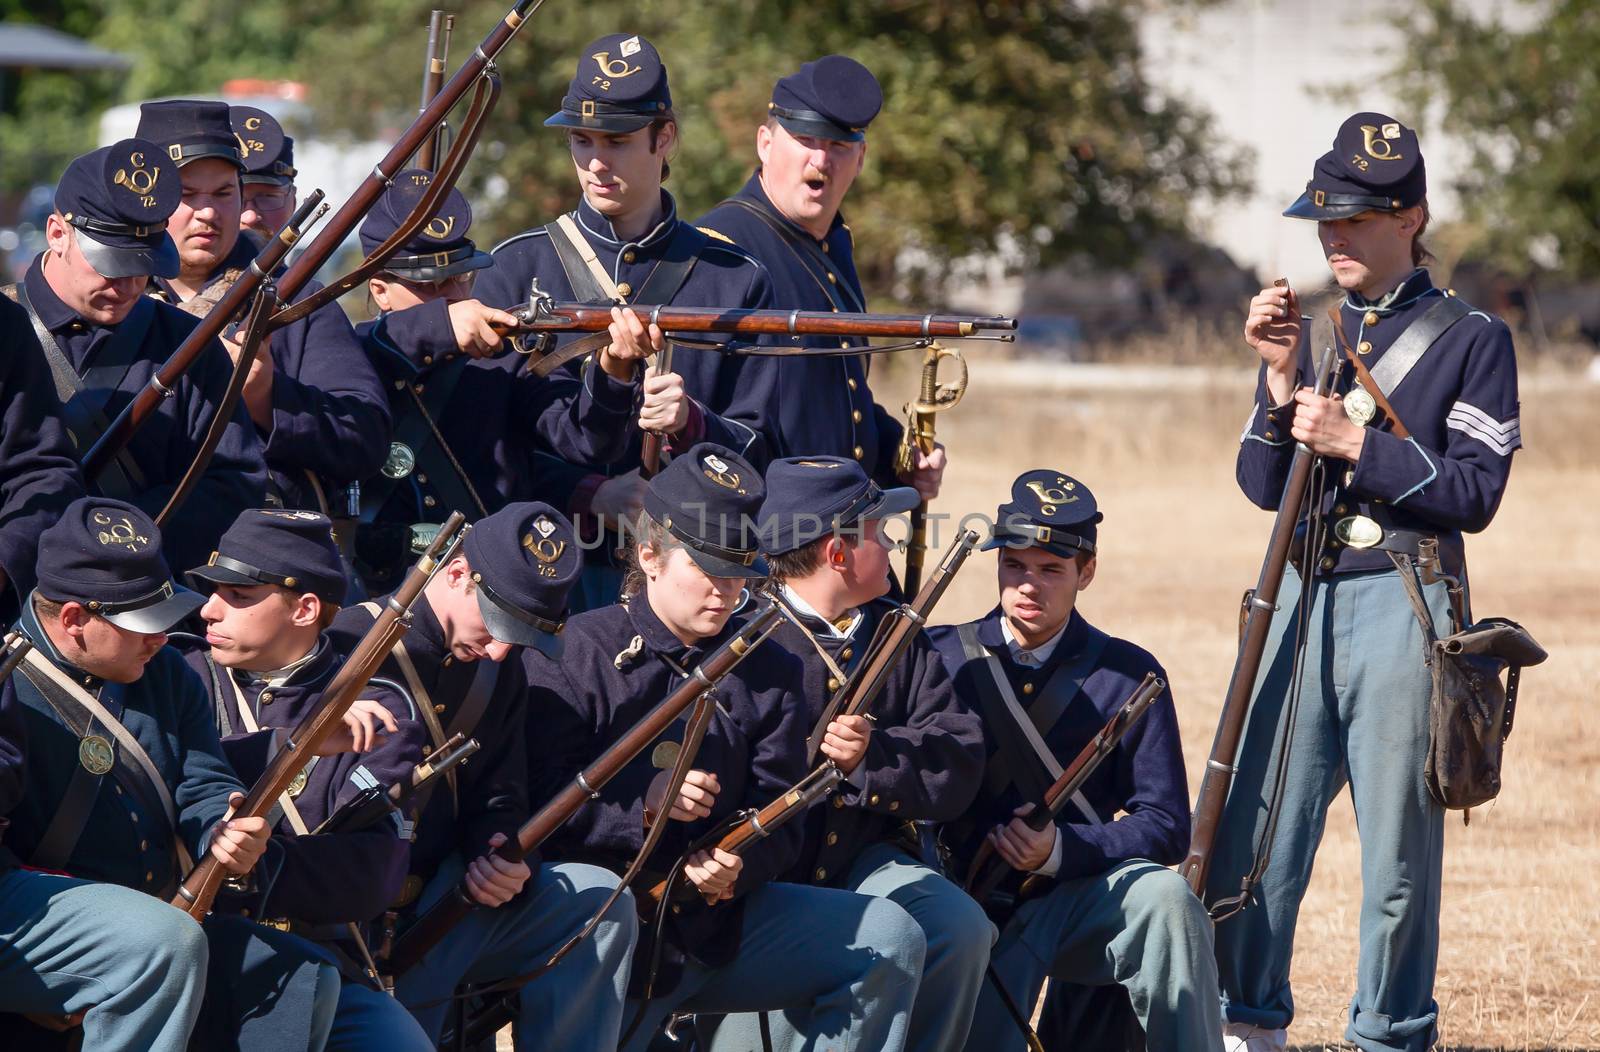 Anderson, California, United States-September 27, 2014: Members of the Union's 72nd New York prepare weapons  during a Civil War reenactment.